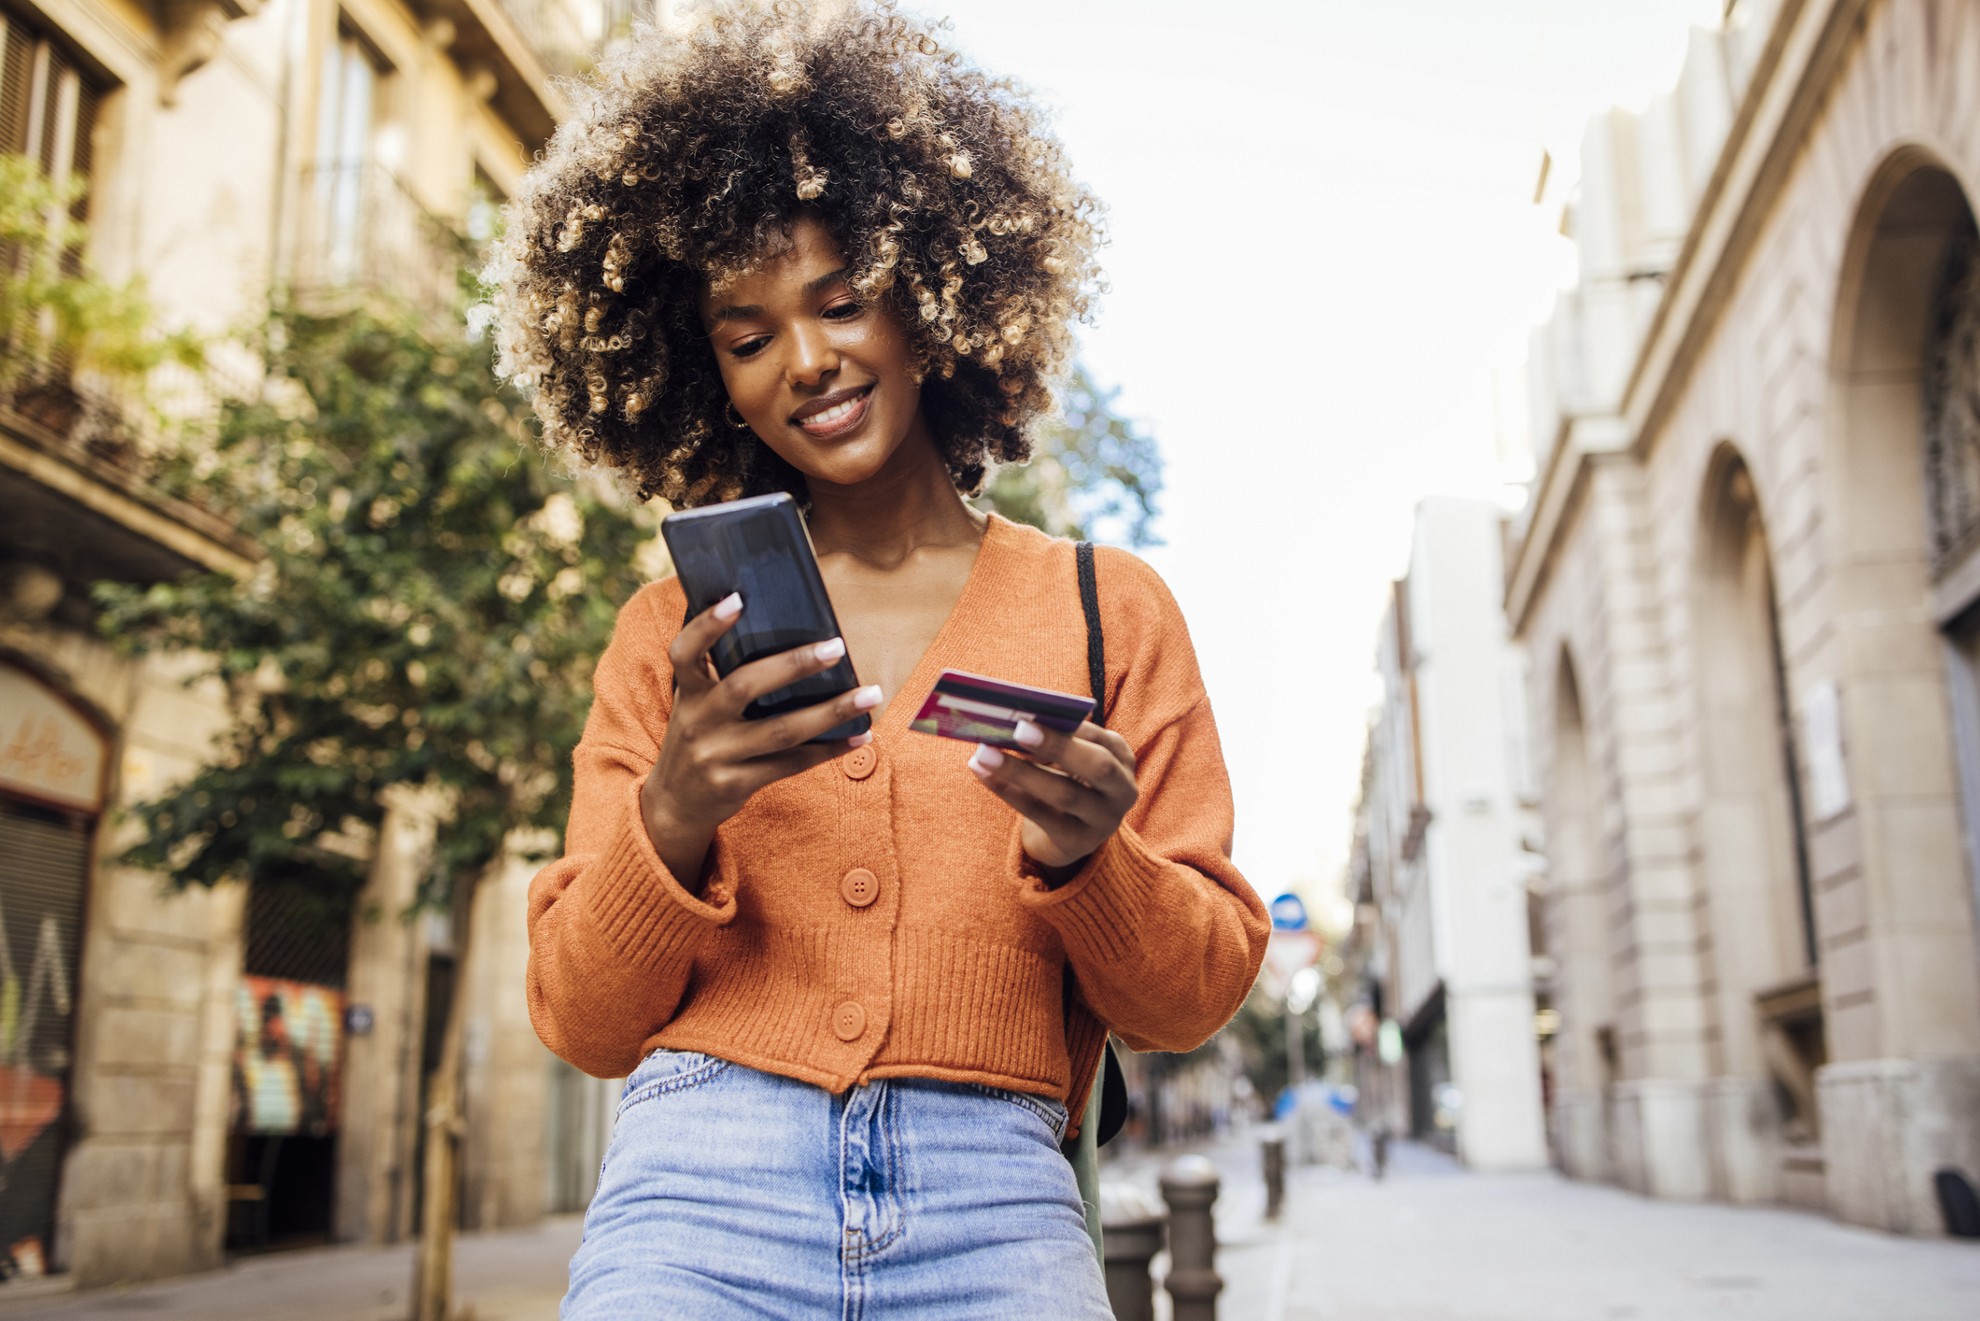 Portrait of a young African American woman on vacation in Barcelona shopping online on the street.